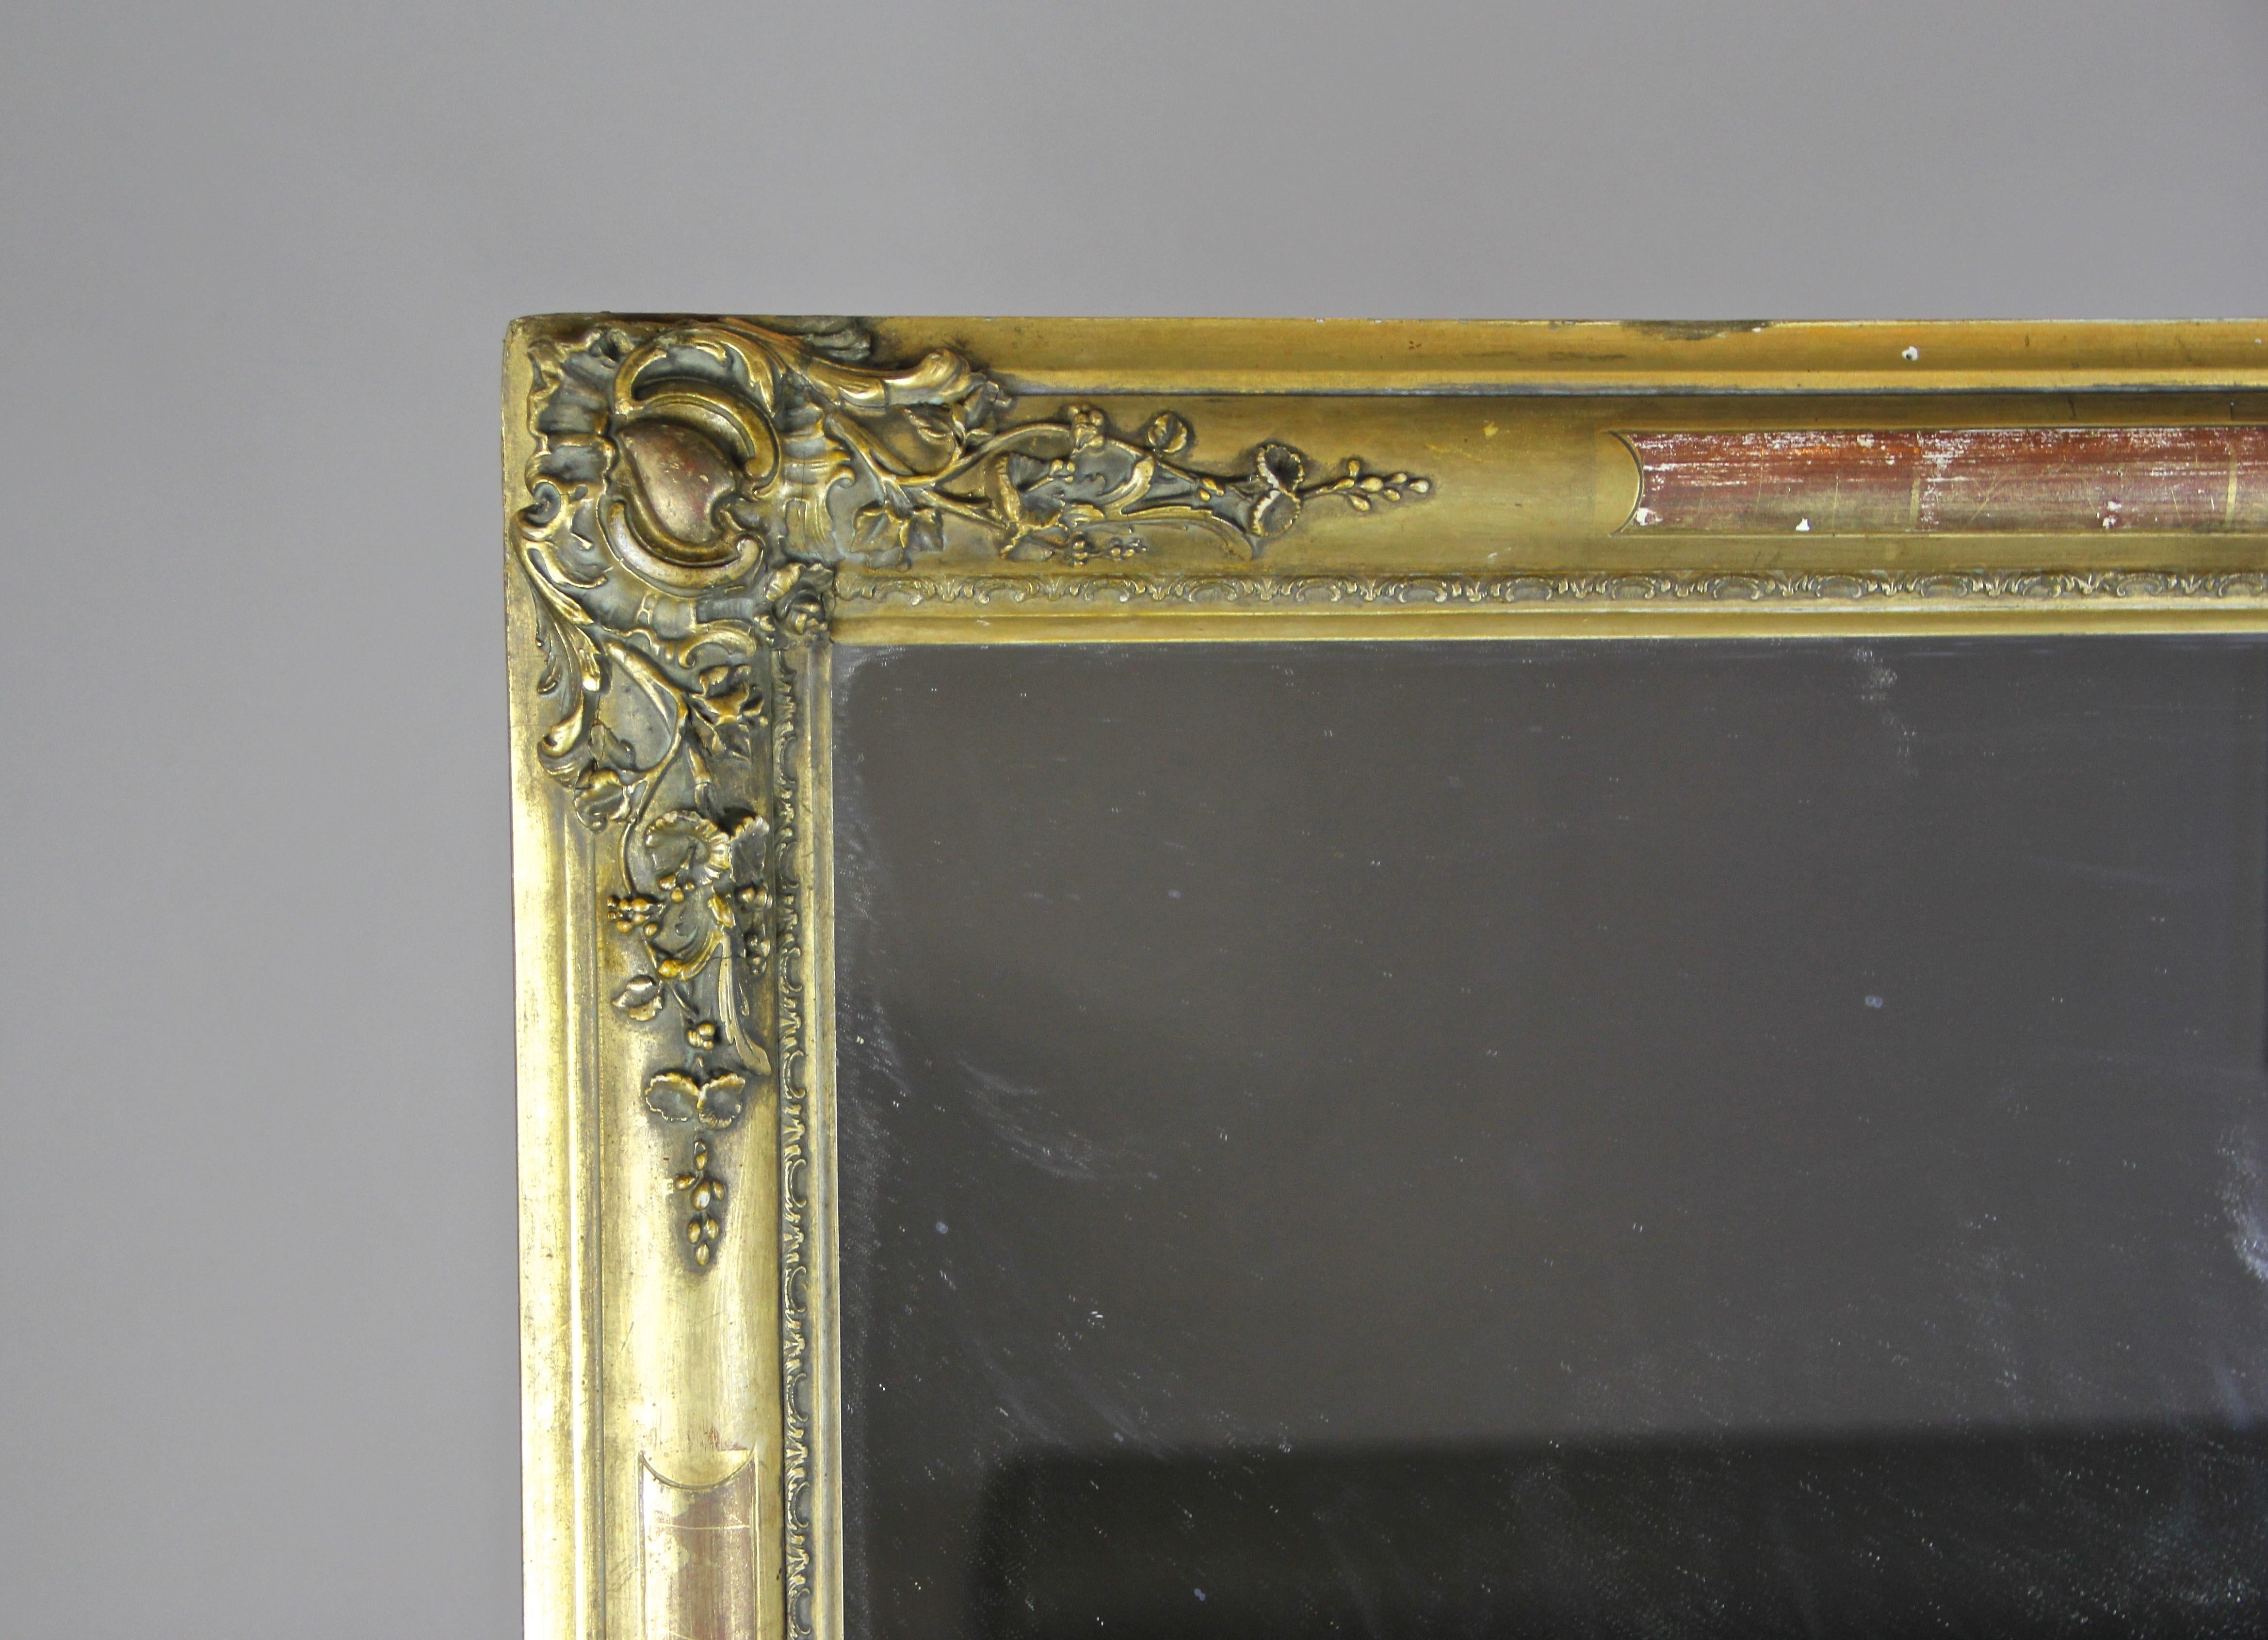 From France circa 1820 comes this fantastic gilt Biedermeier mirror. This breathtaking golden frame shows different gilding techniques like composition gold and gold leaf. Beautiful floral stucco works in each corner adorned by a gorgeous looking